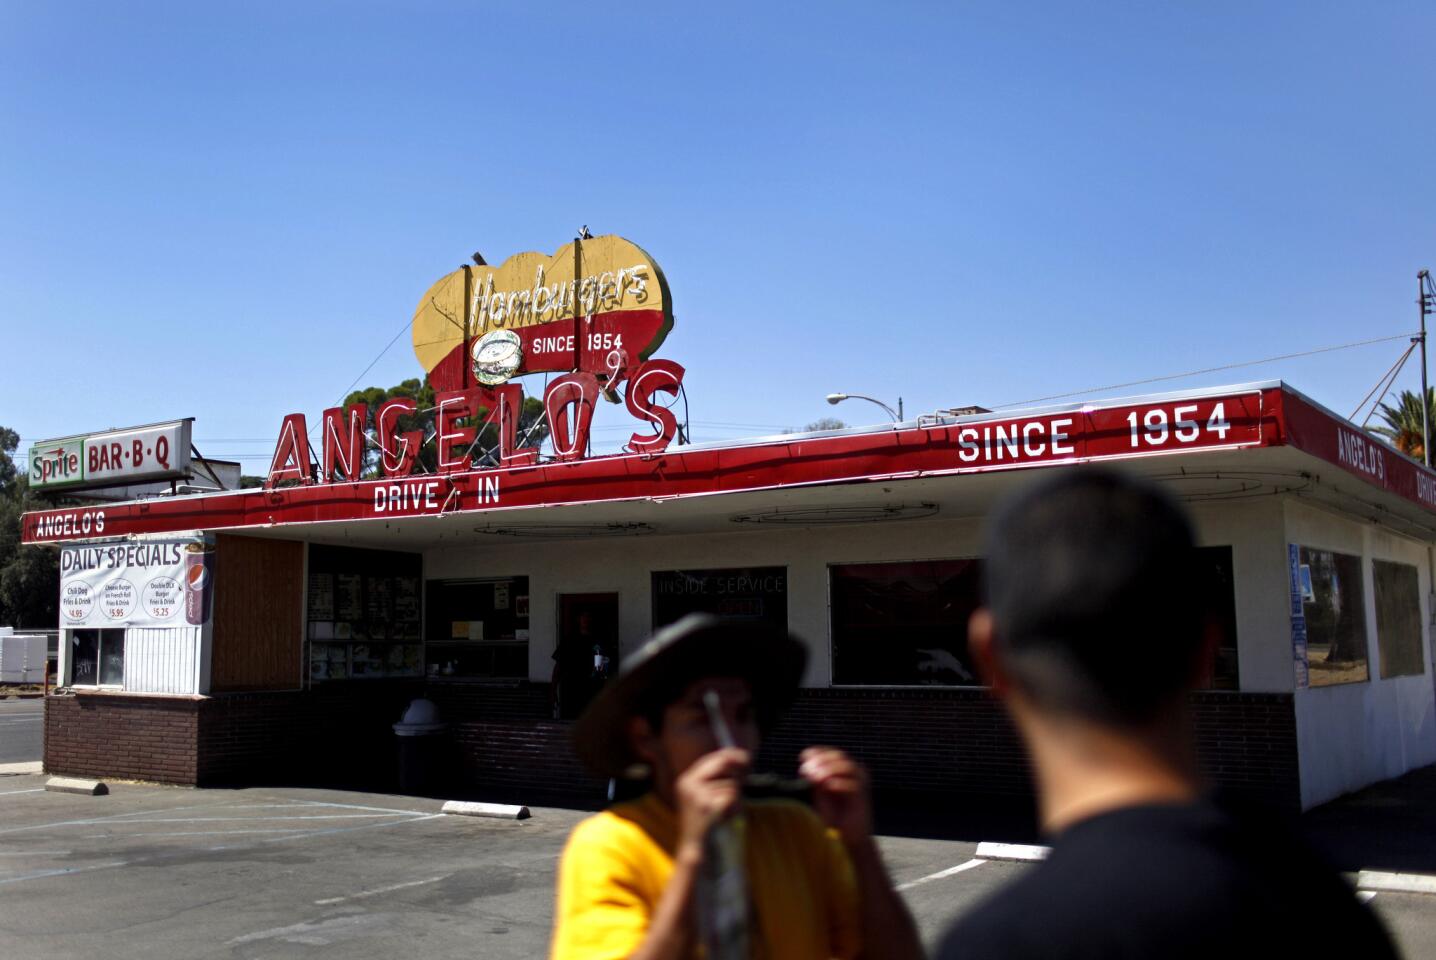 Angelo's is an institution in Fresno. The burger joint has been around since the 1950s and once featured drive-up service. The high-speed rail project that will start in the Central Valley needs the property it's situated on. The owners, the Chea family, have been told they must vacate by Sept. 15.